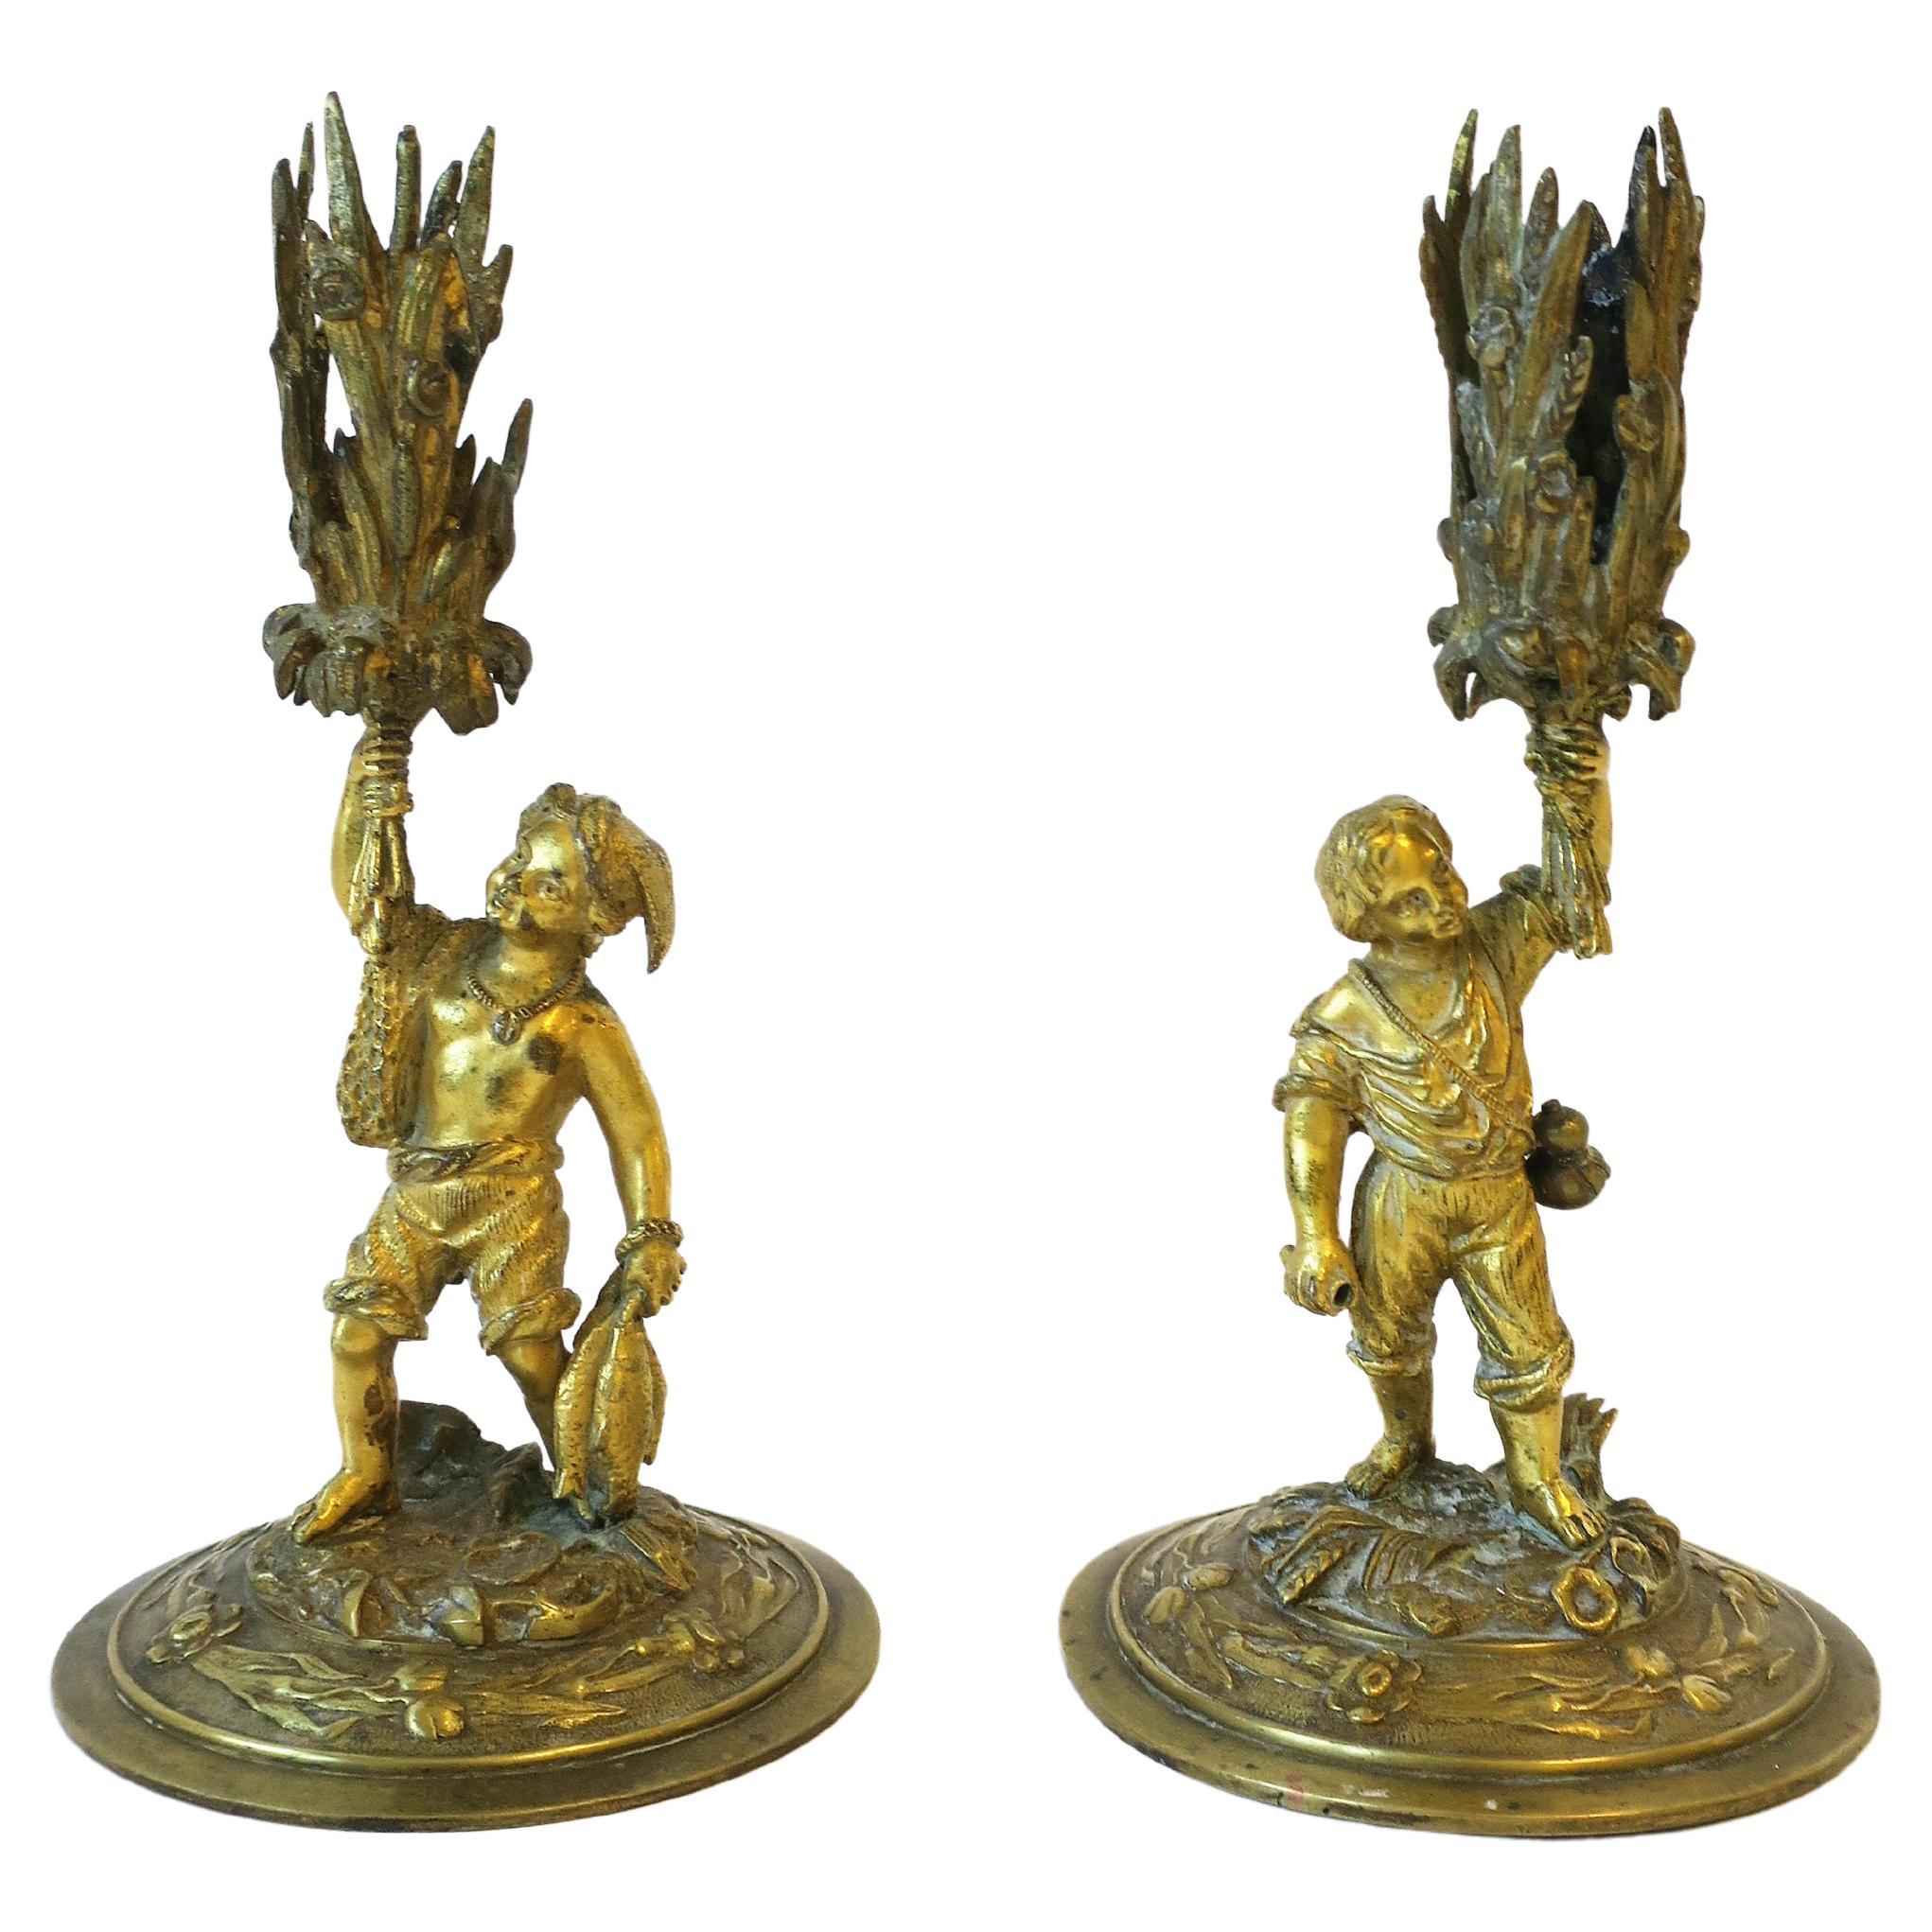 Bronze Male Sculptures Figurative Candlestick Holders, Pair, 19th Century